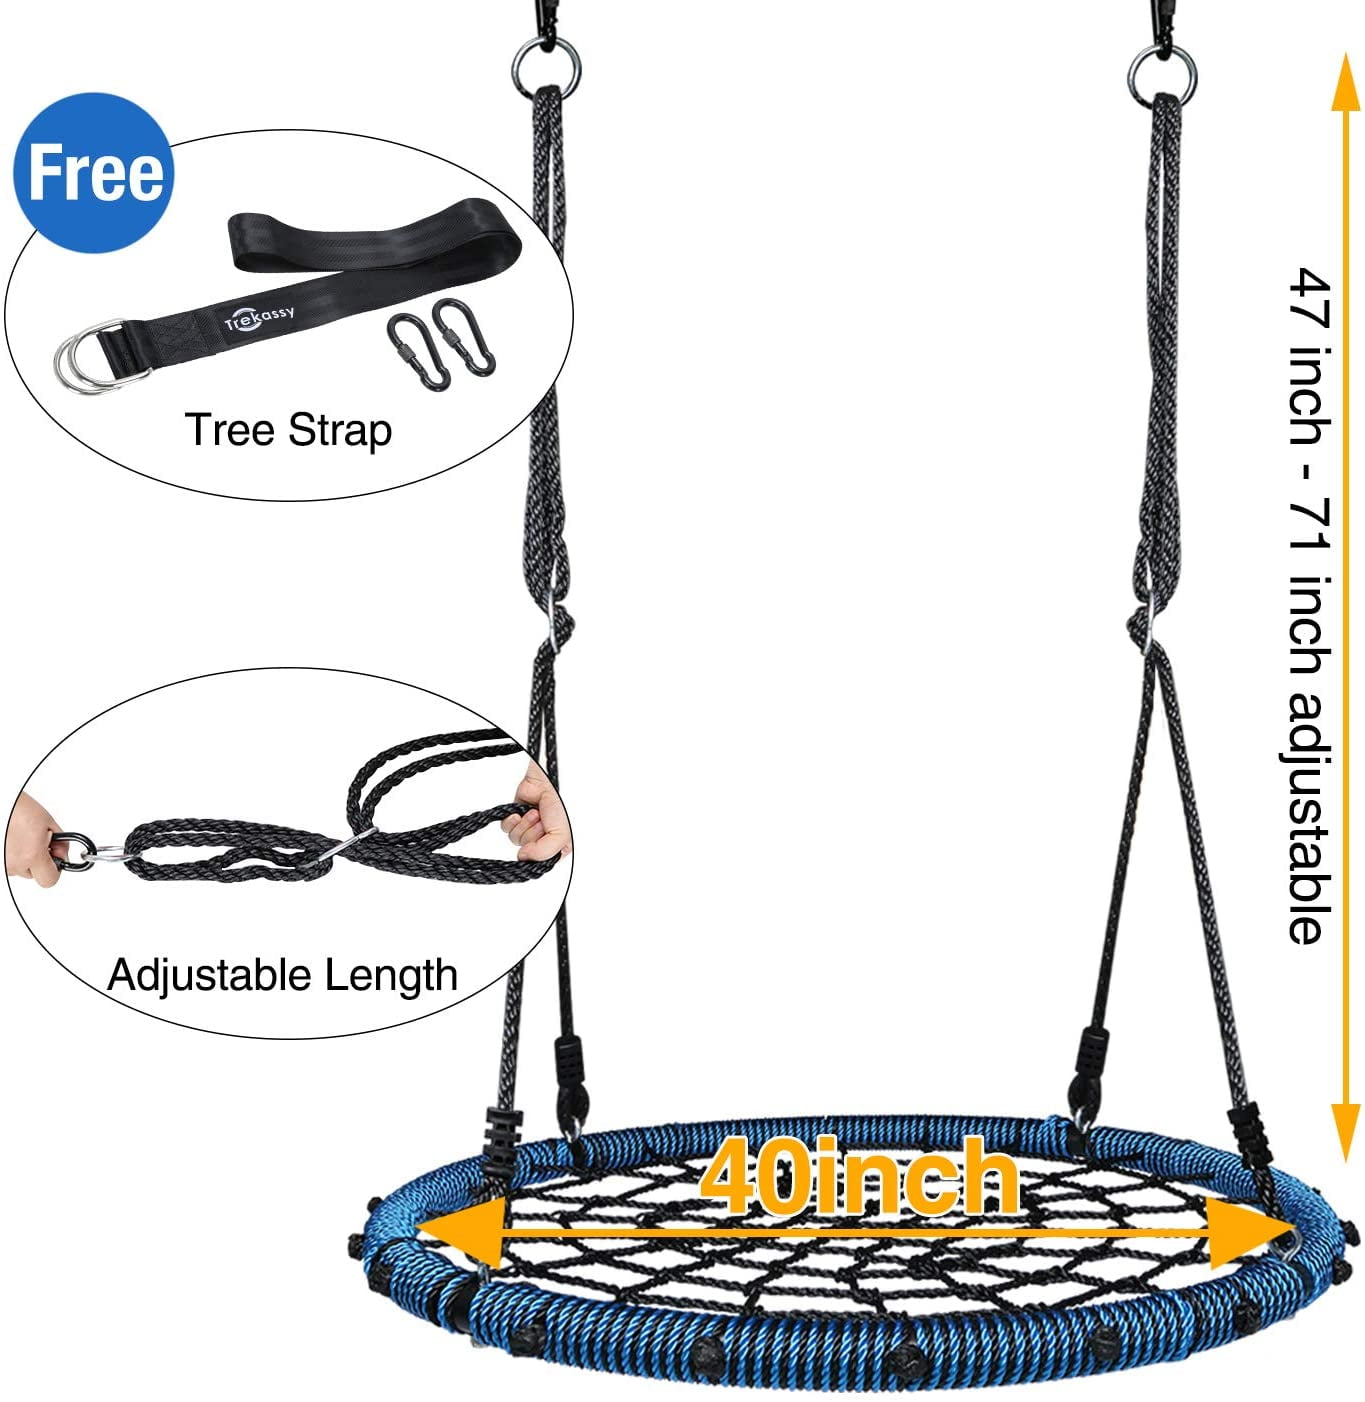 Pitpat 40 Inch Web Swing for Kids 660 Lbs Weight Capacity Outdoor Large Web Swings for Tree Black Spider Web Swing with 4 Adjustable Hanging Straps and Stainless Steel Frame 